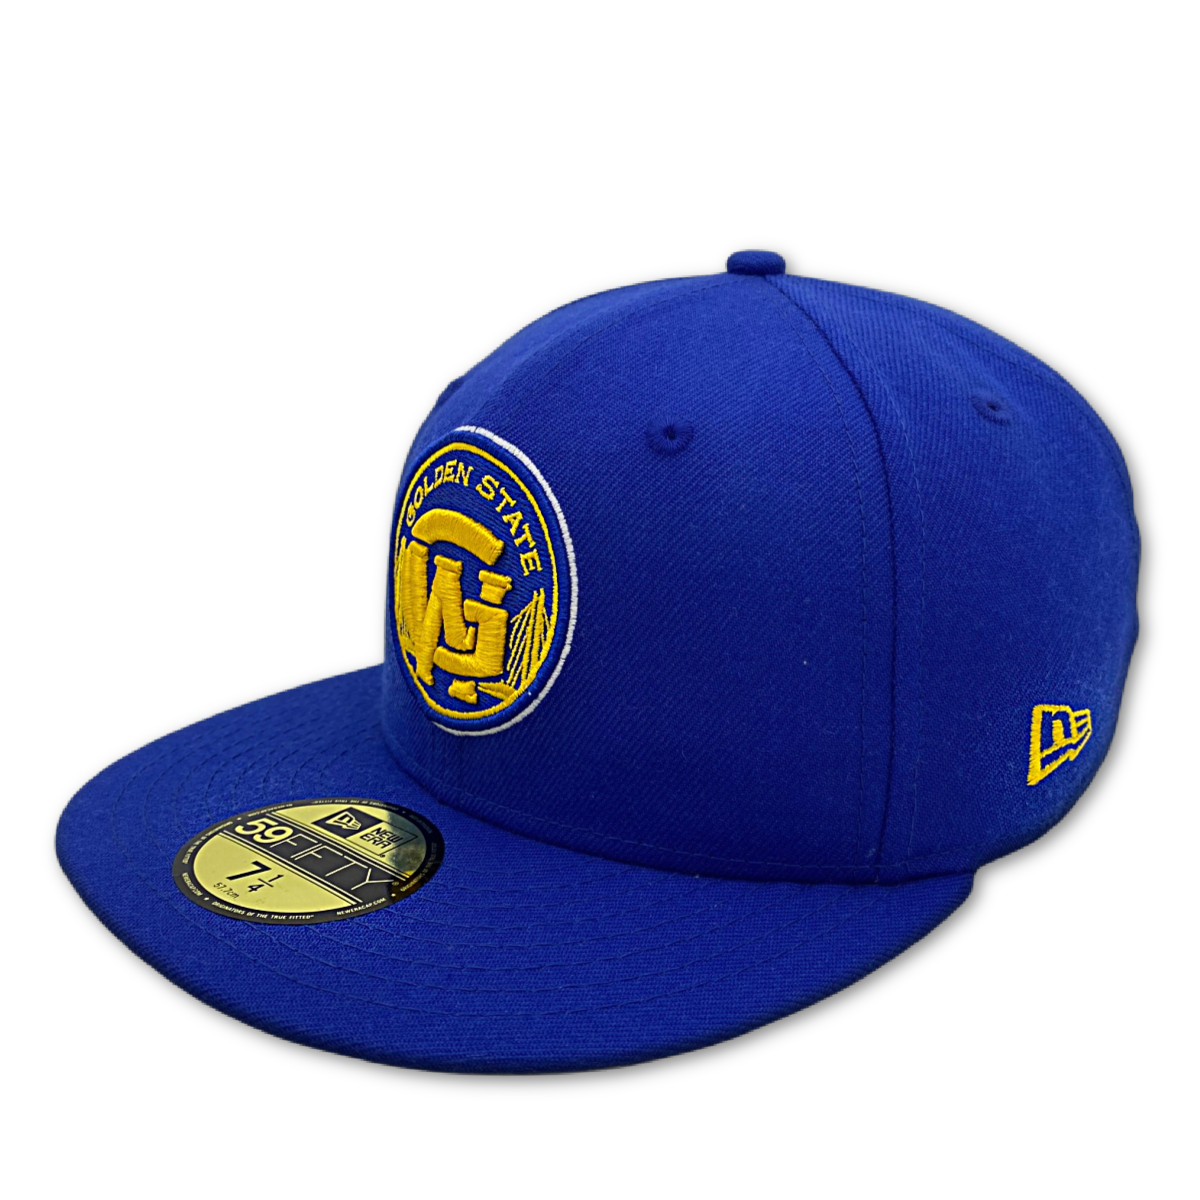 GOLDEN STATE WARRIORS COMBO LOGOS 59FIFTY HAT-ROYAL nvsoccer.com The Coliseum